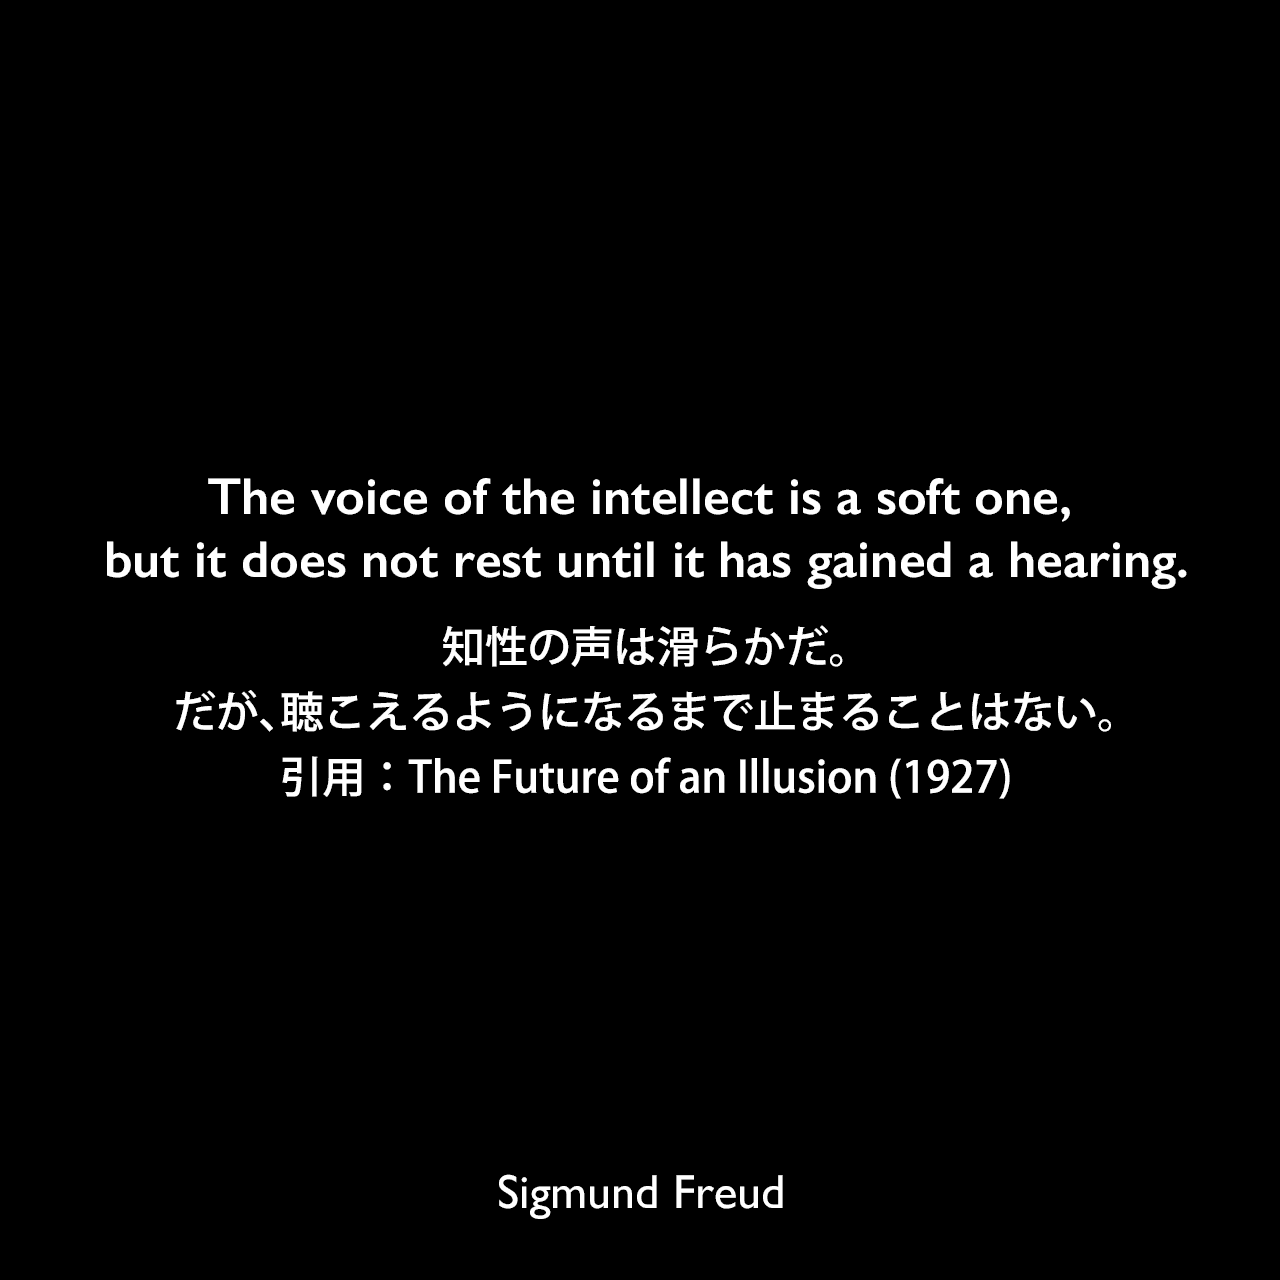 The voice of the intellect is a soft one, but it does not rest until it has gained a hearing.知性の声は滑らかだ。だが、聴こえるようになるまで止まることはない。- フロイトによる本「The Future of an Illusion (1927)」よりSigmund Freud